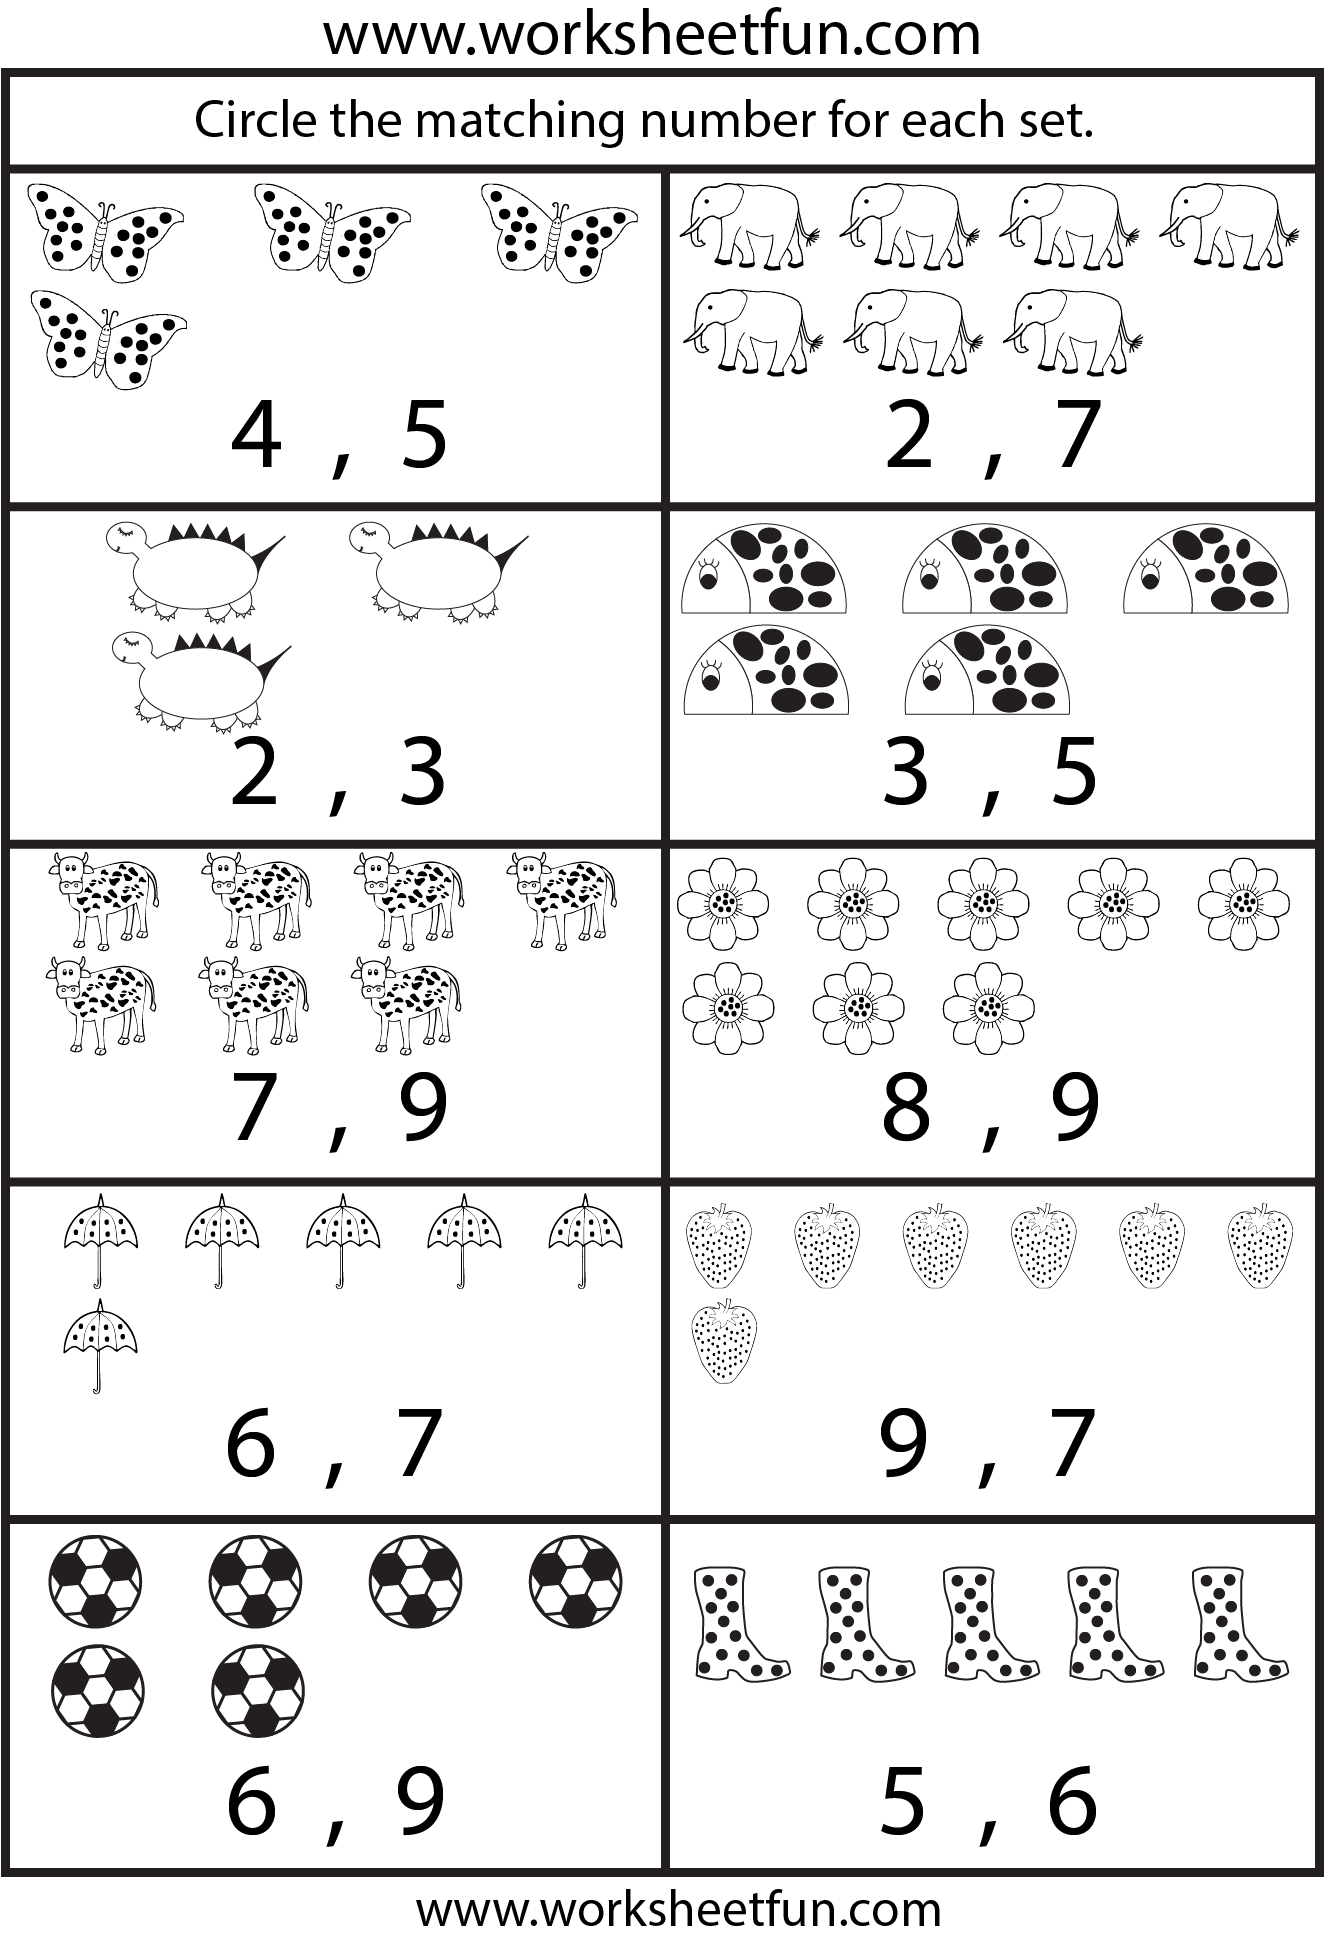 NEW 916 COUNTING NUMBERS WORKSHEETS 1 50 Counting Worksheet